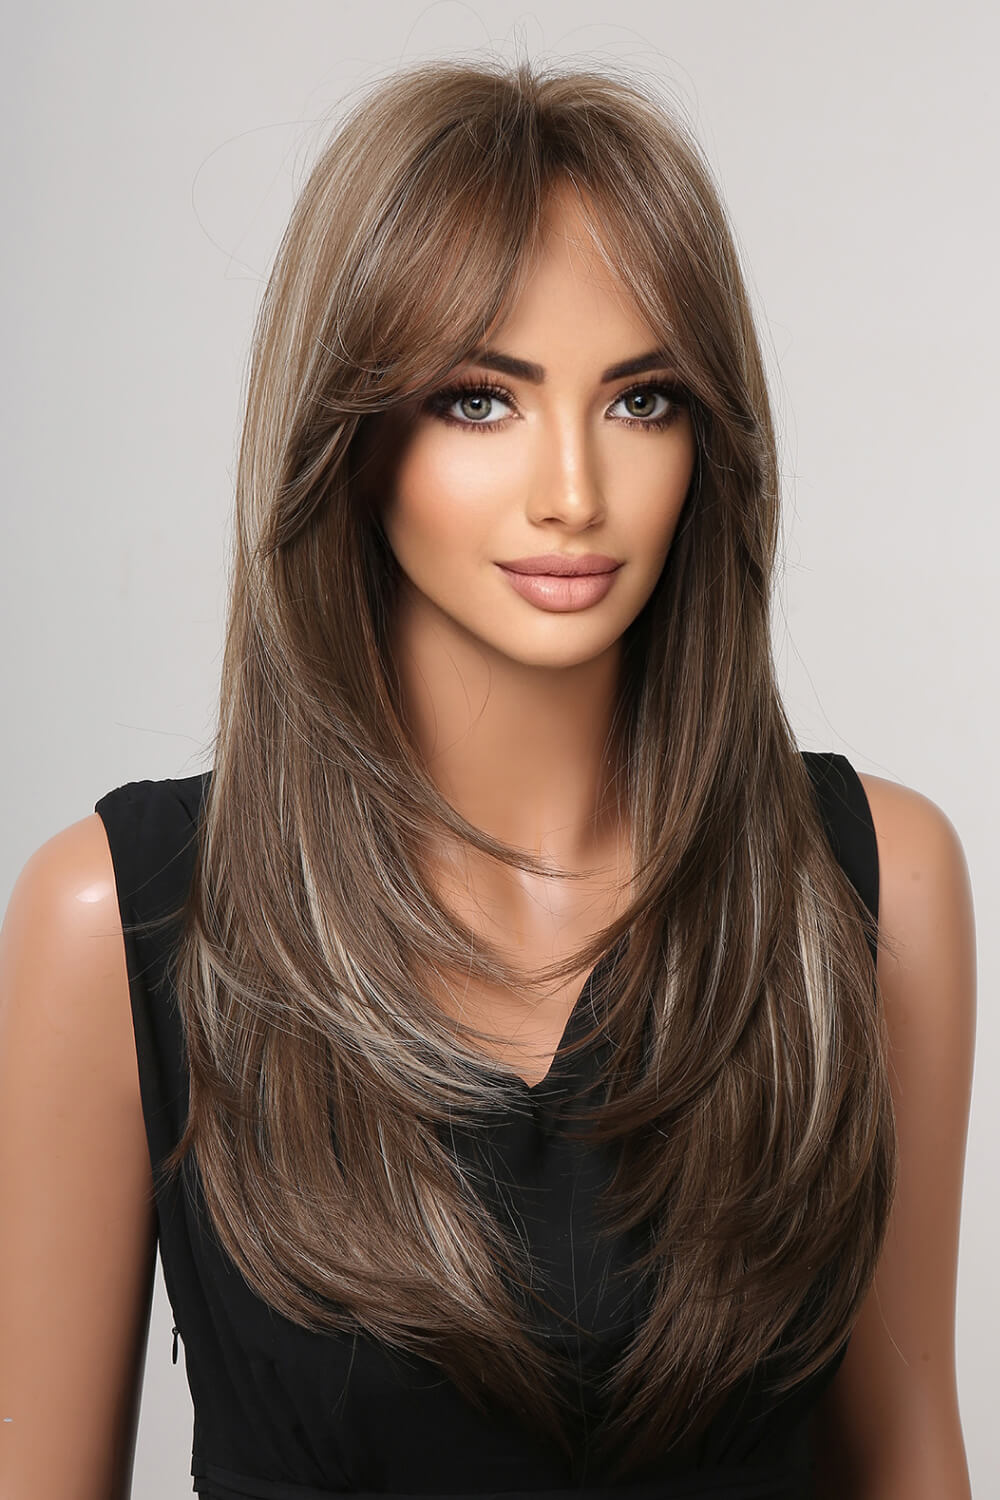 13*1" Full-Machine Wigs Synthetic Long Straight 22" - Uylee's Boutique